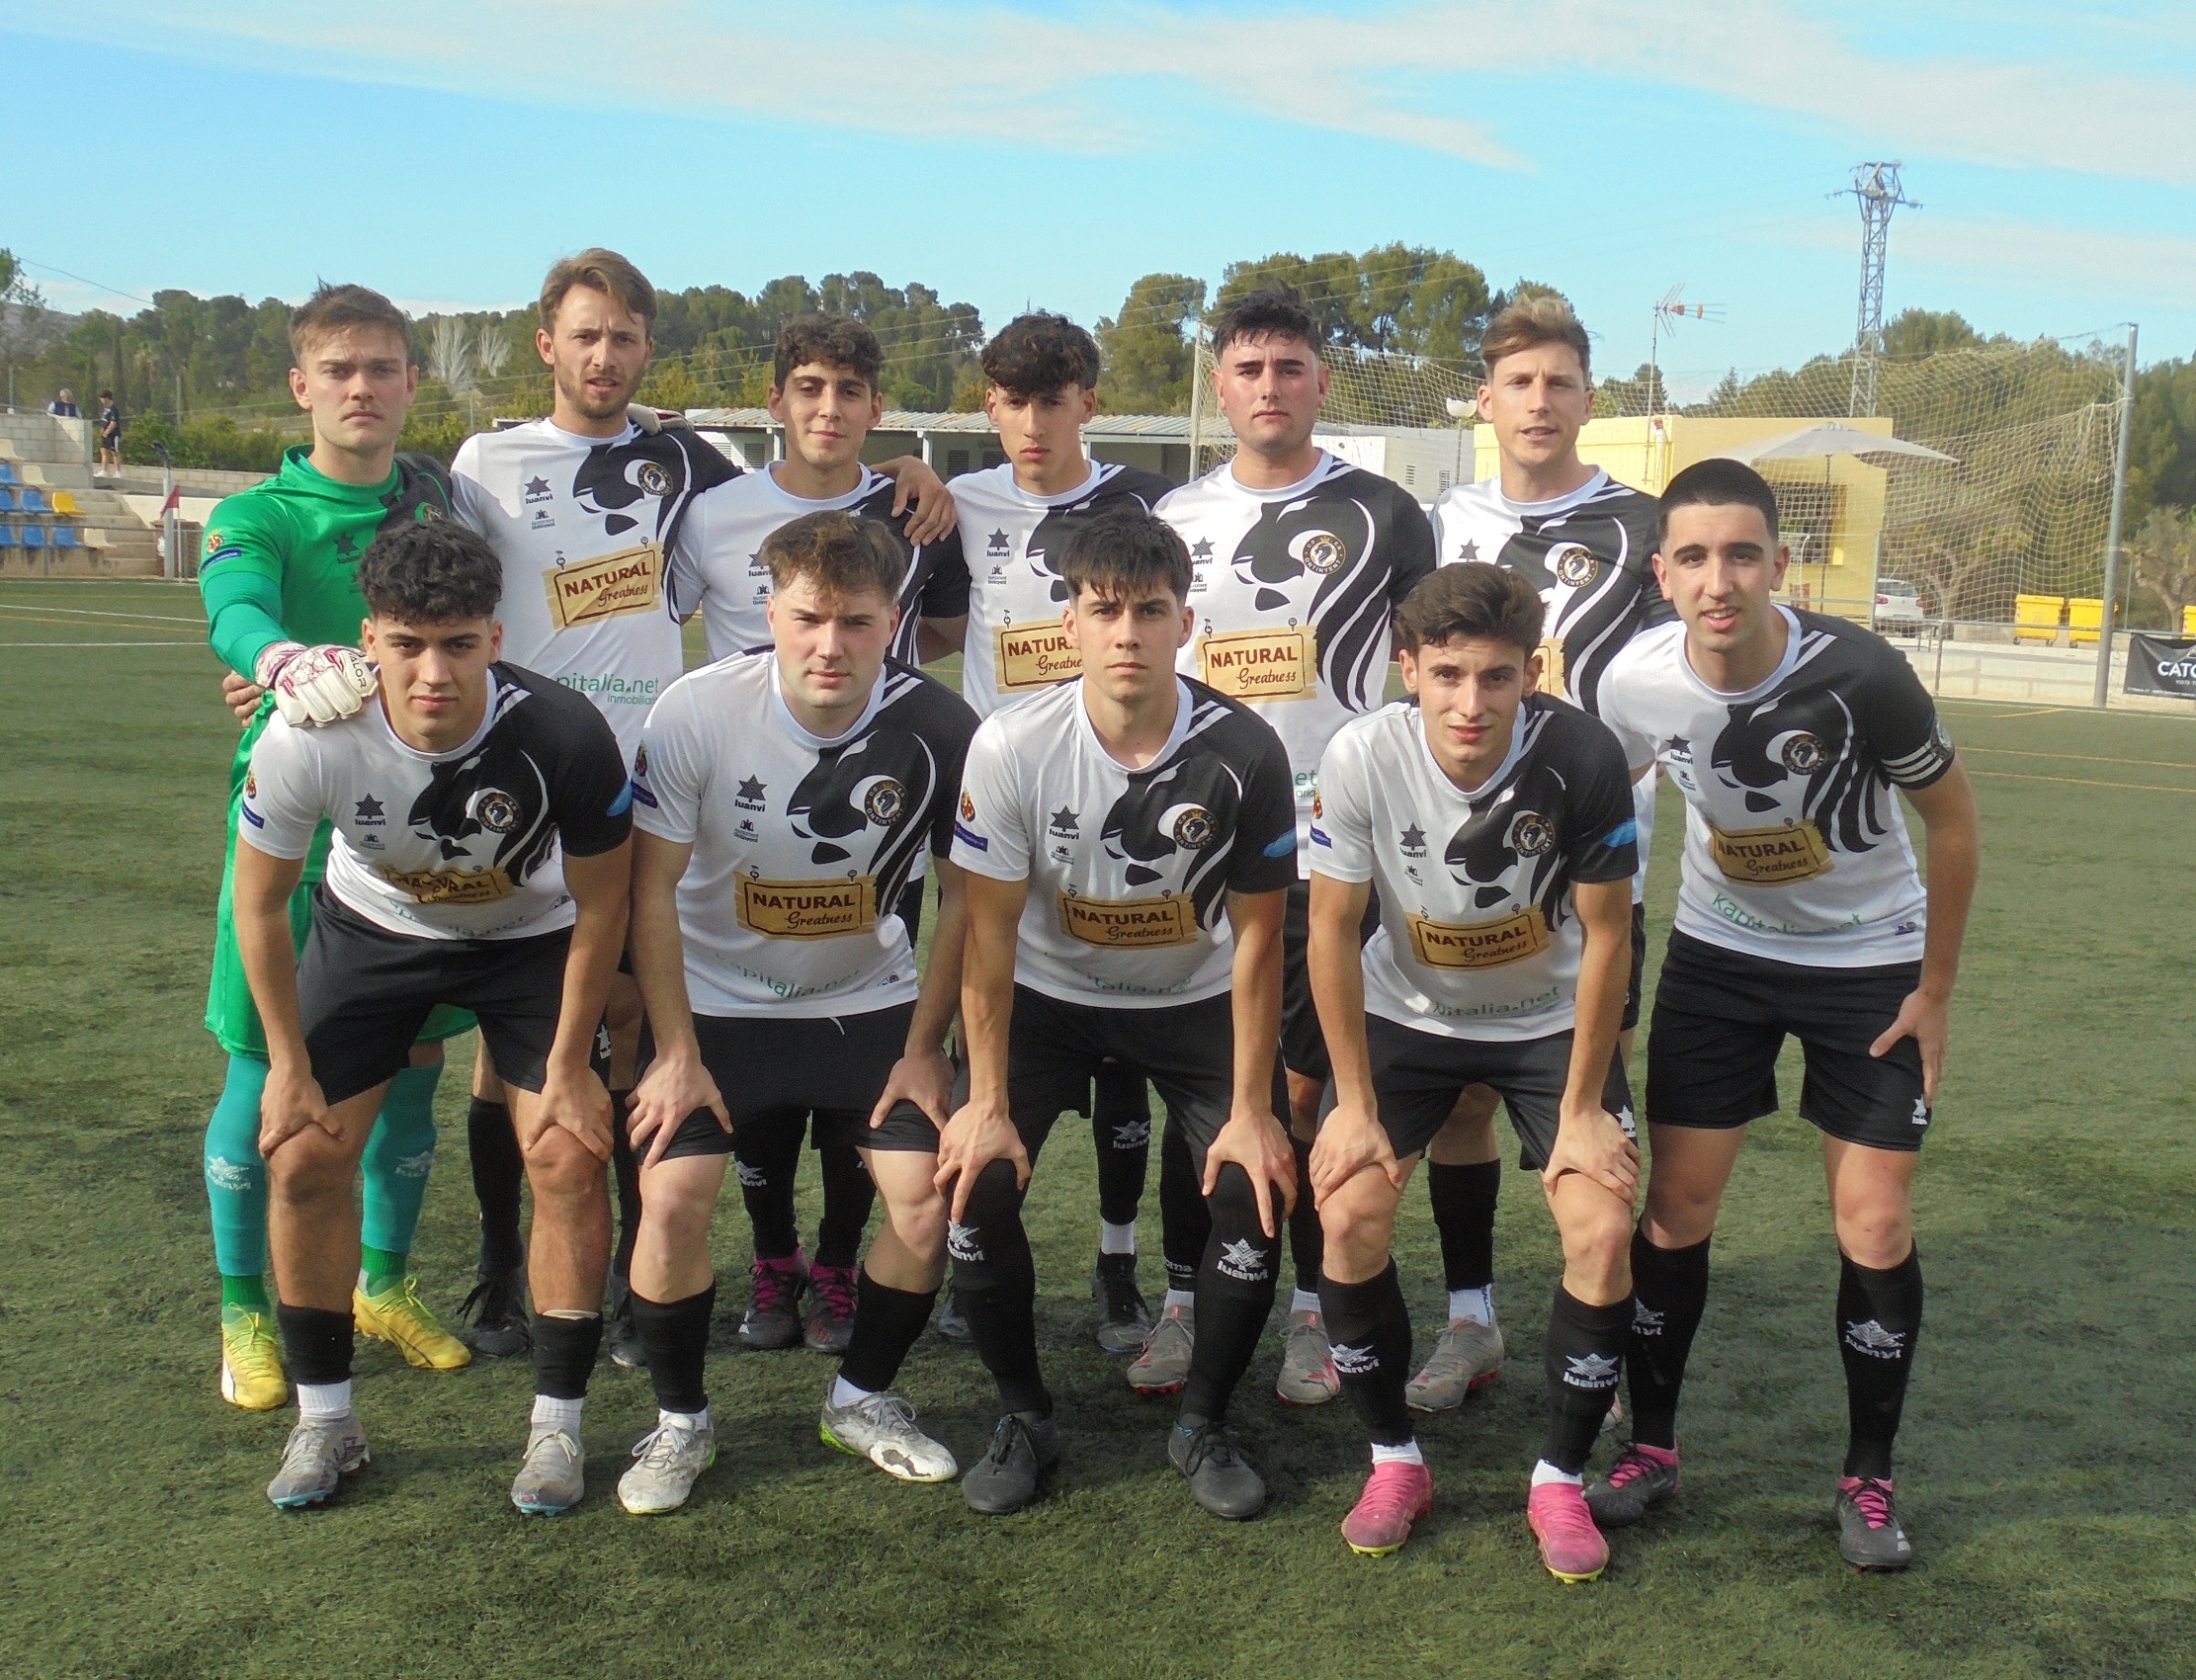 26_J Deportivo Ontinyent 1-2 UD Carcaixent